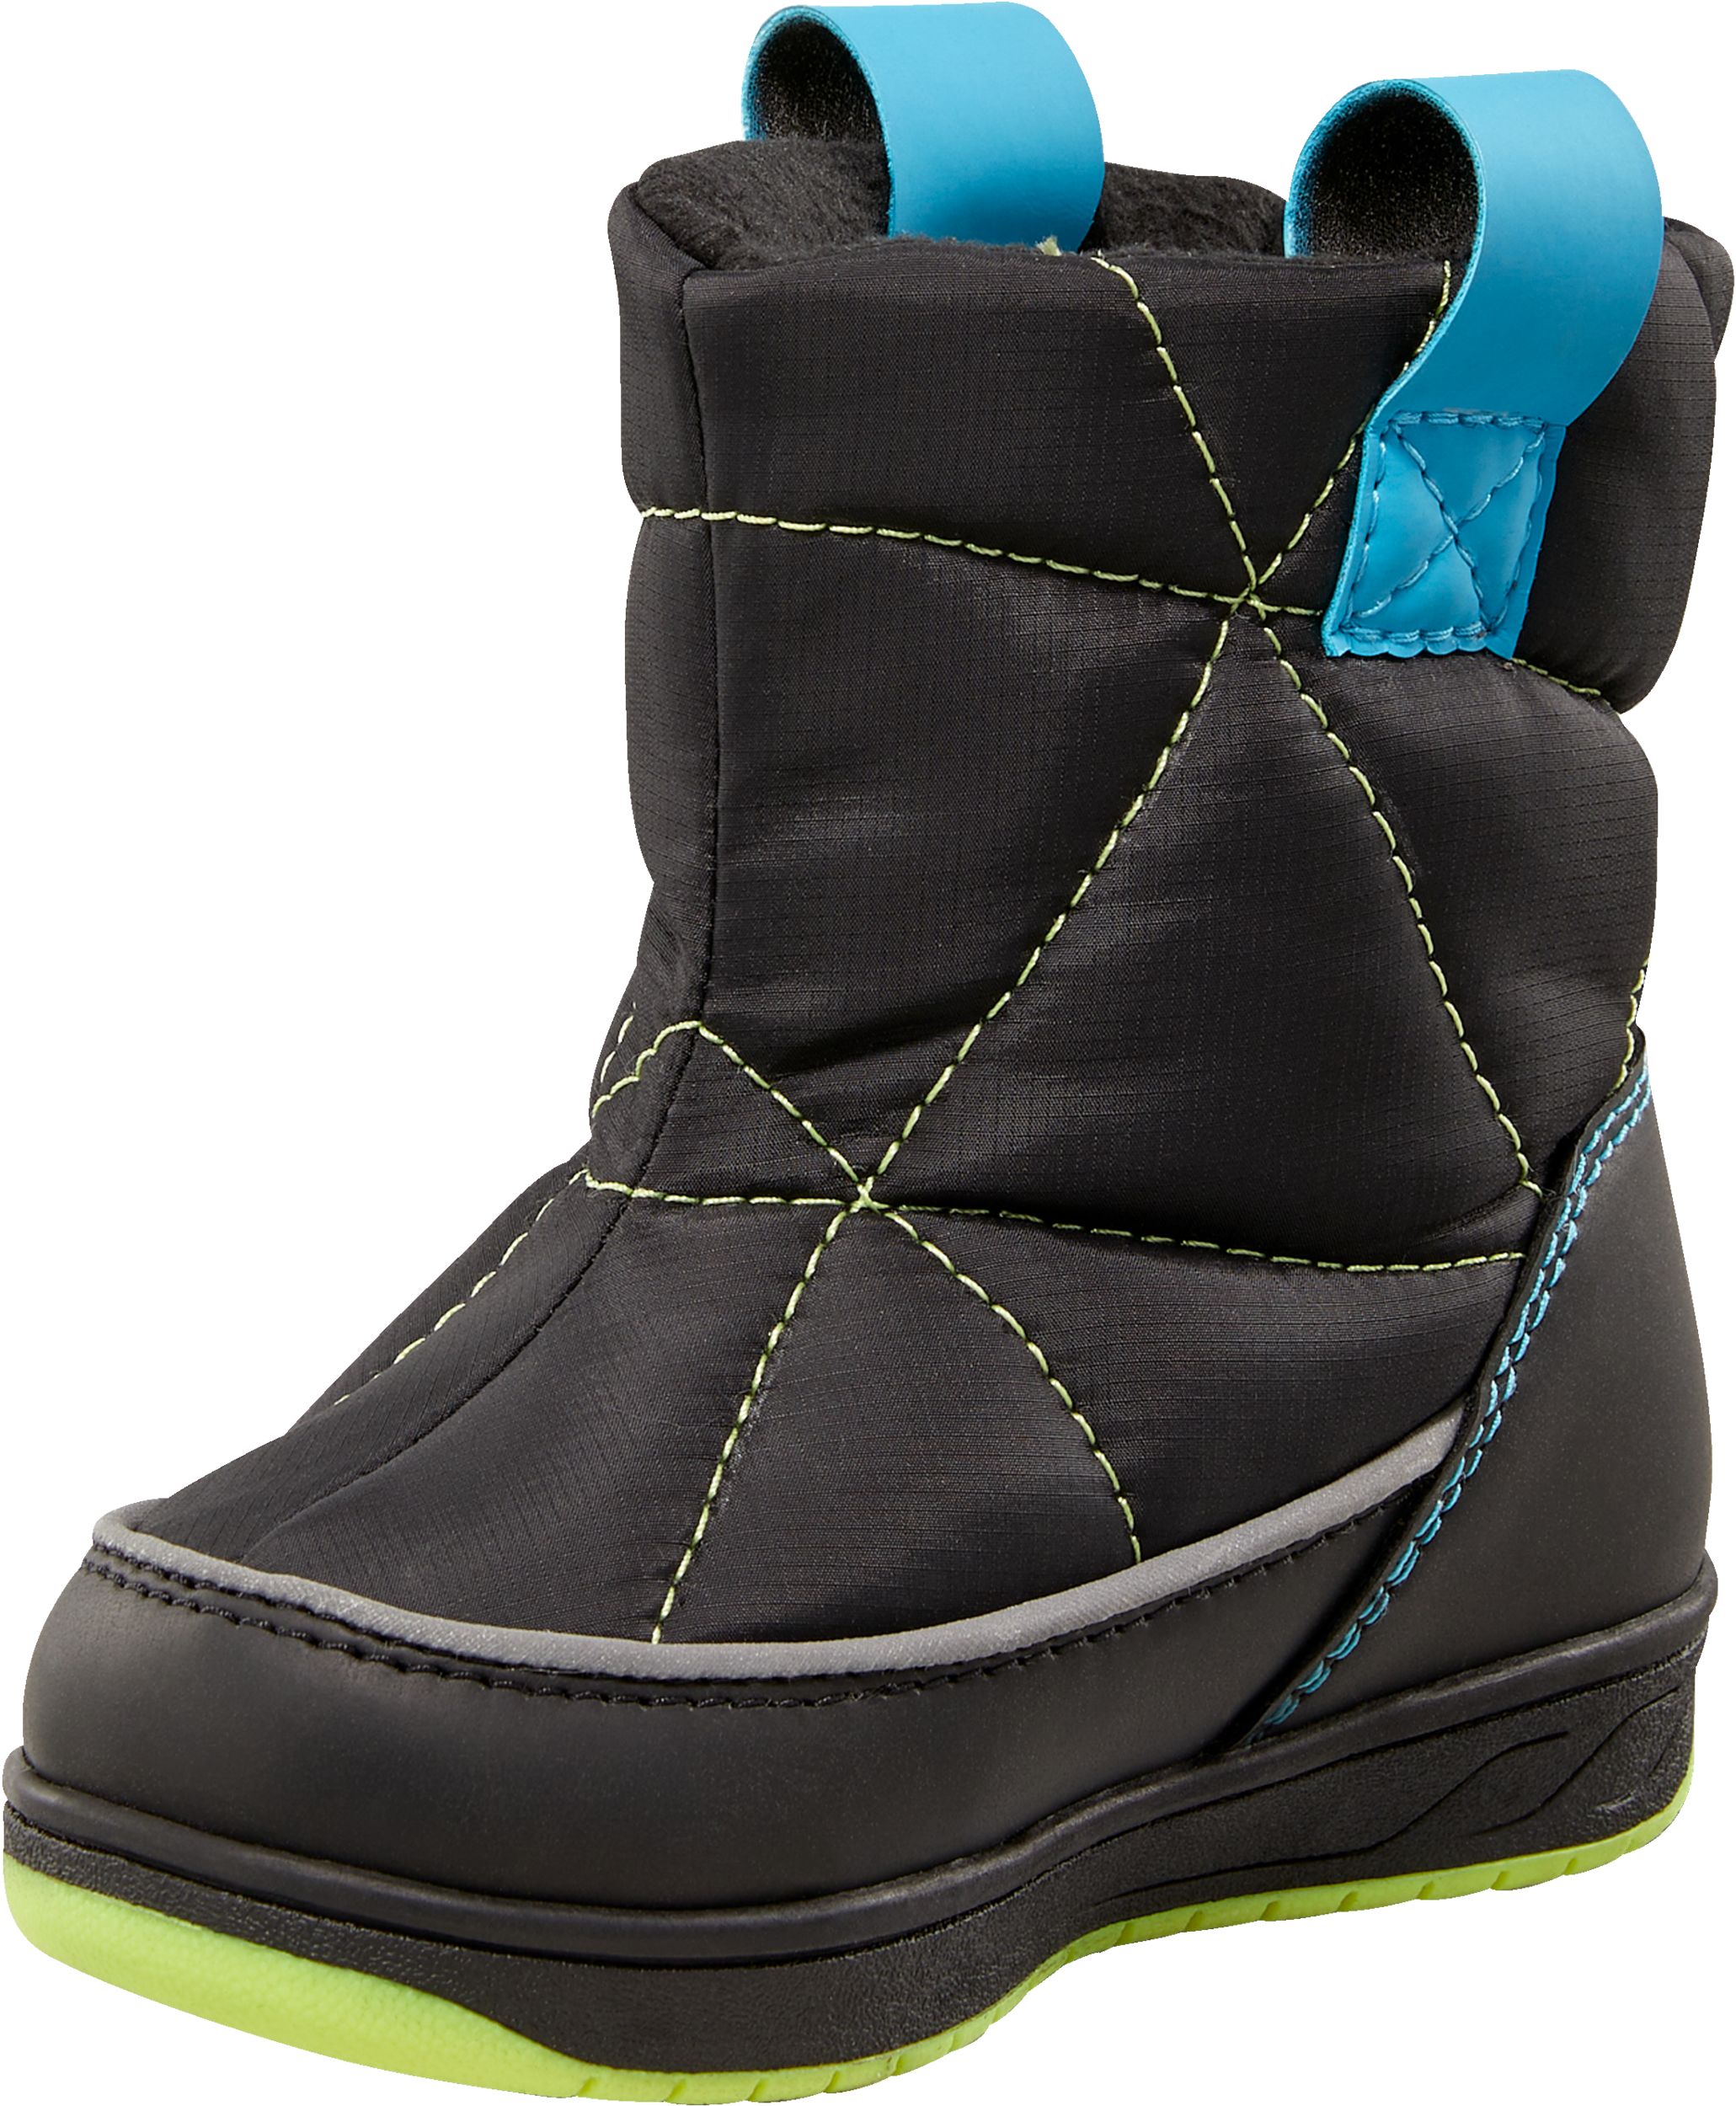 Ripzone Toddler Kids' Autumn Casual Winter Boots | SportChek